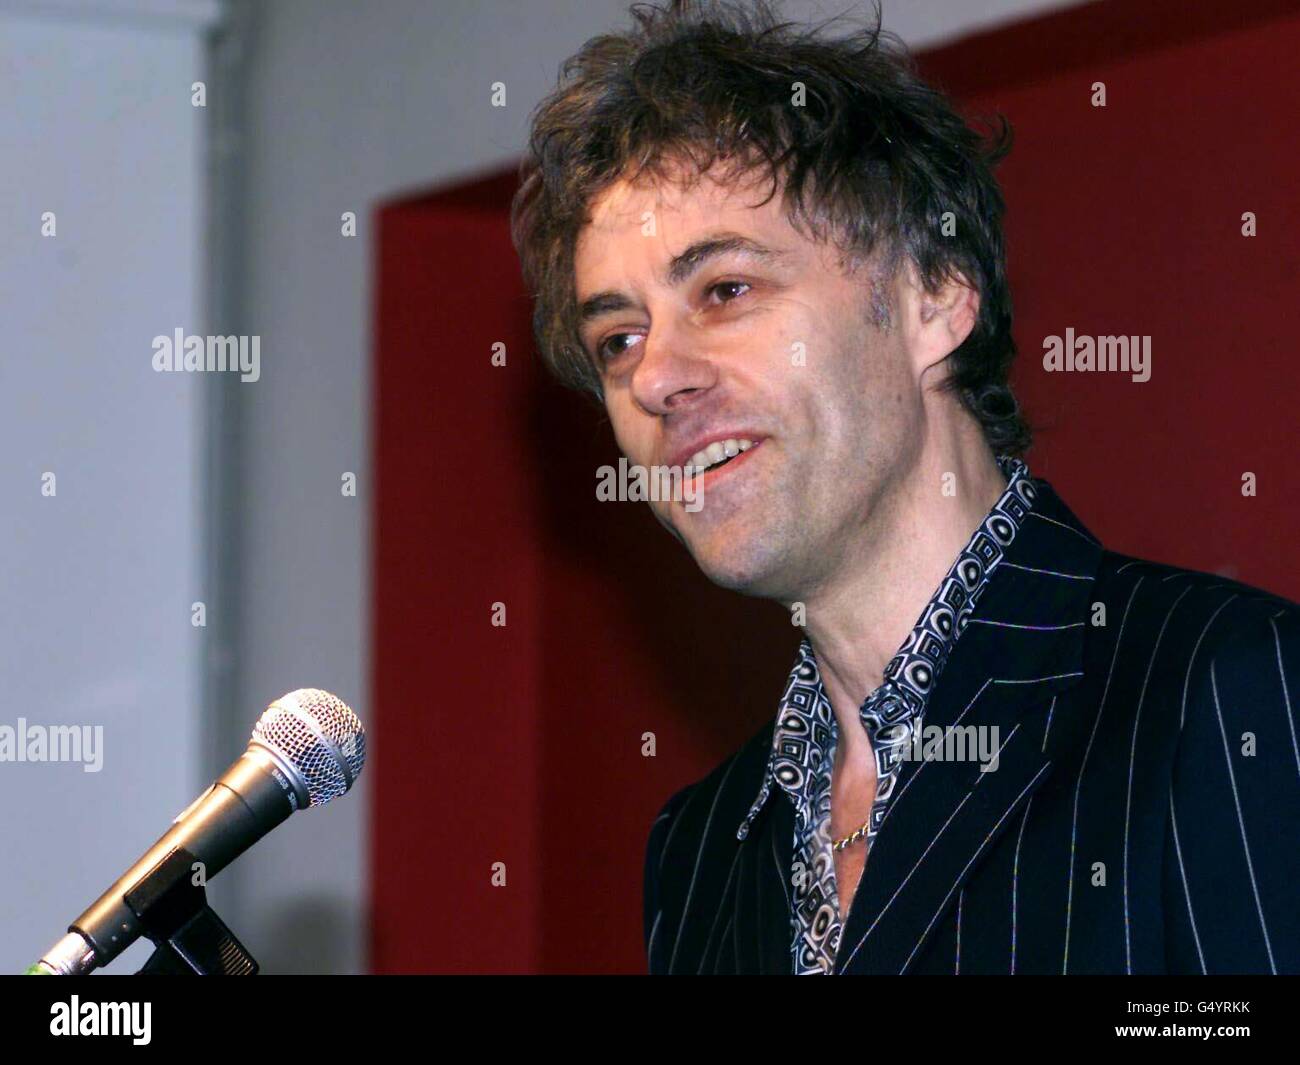 Pop star and radio DJ Bob Geldof speaking during a Jubilee 2000 Reception in London, as wealthy countries in the world have promised to write off 100 billion US dollars of the debt of the poorest countries, in response to the Jubilee 2000 debt campaign. Stock Photo